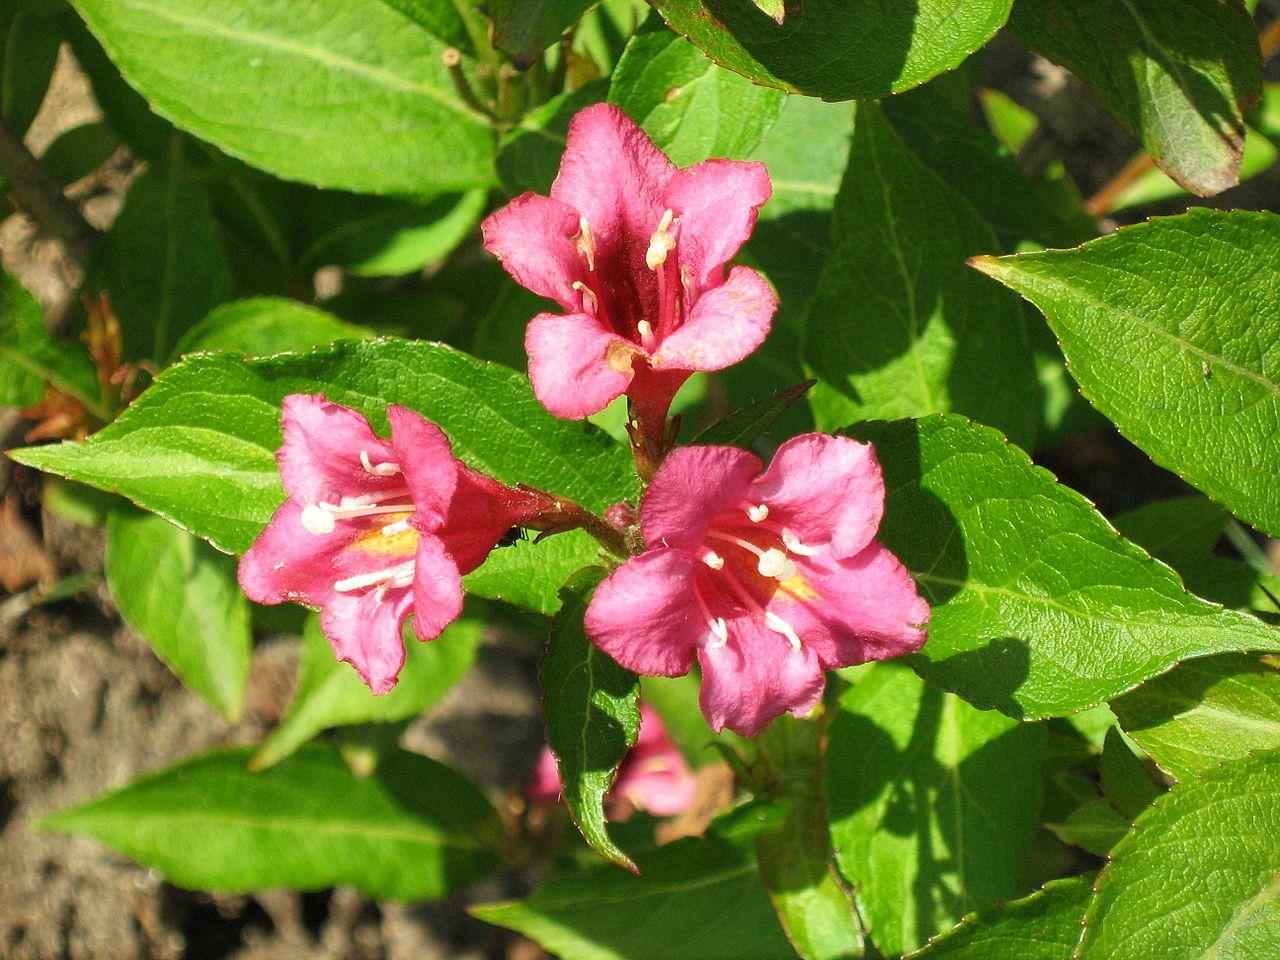 pink flowers with yellow anthers, pink filaments, green leaves and stems